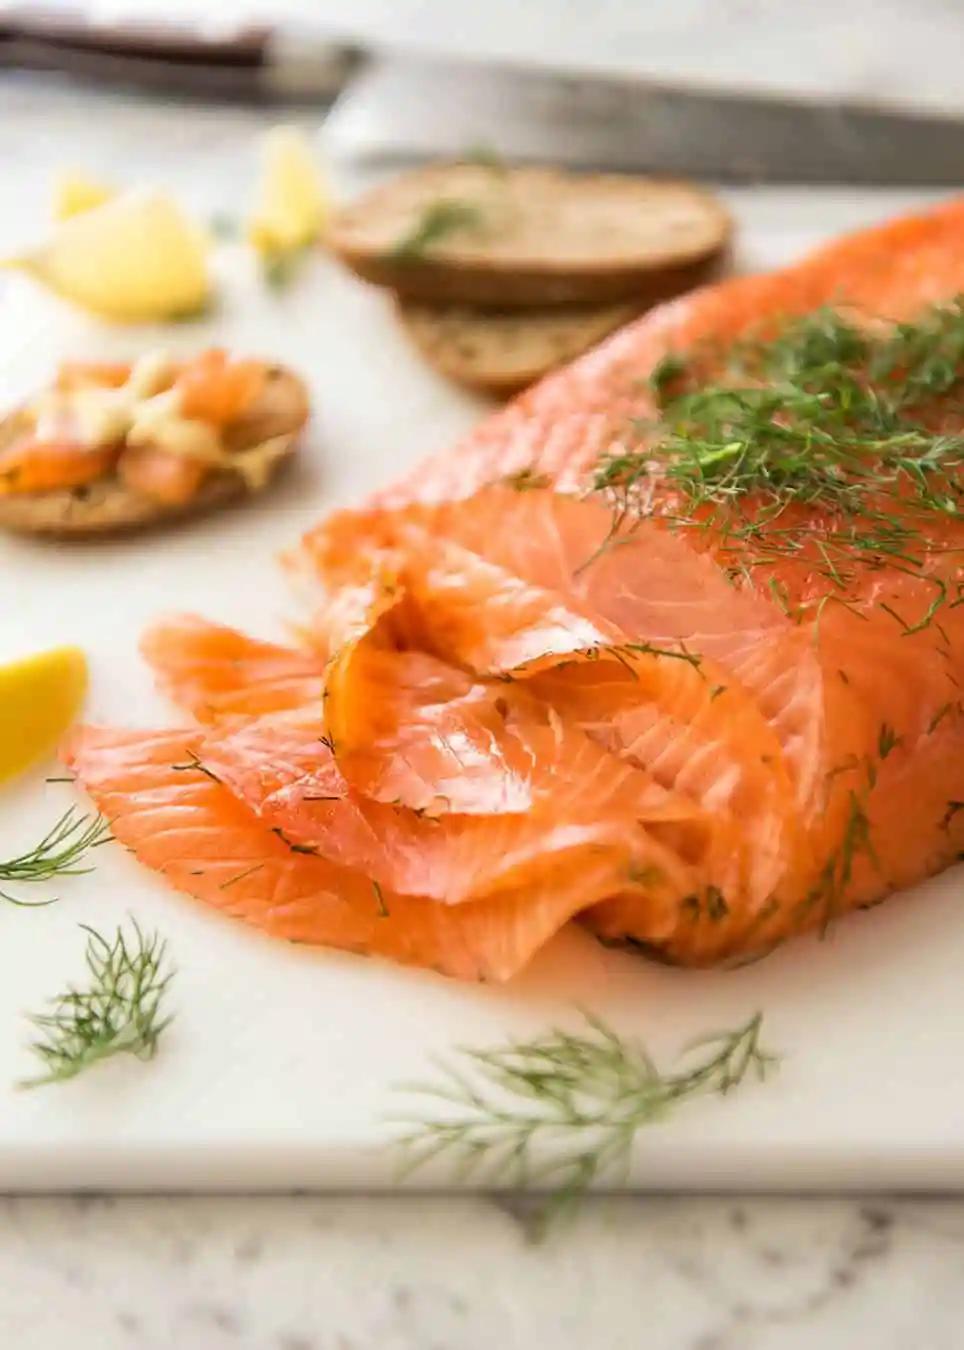 dry cure smoked salmon - How do you dry cure fish for smoking